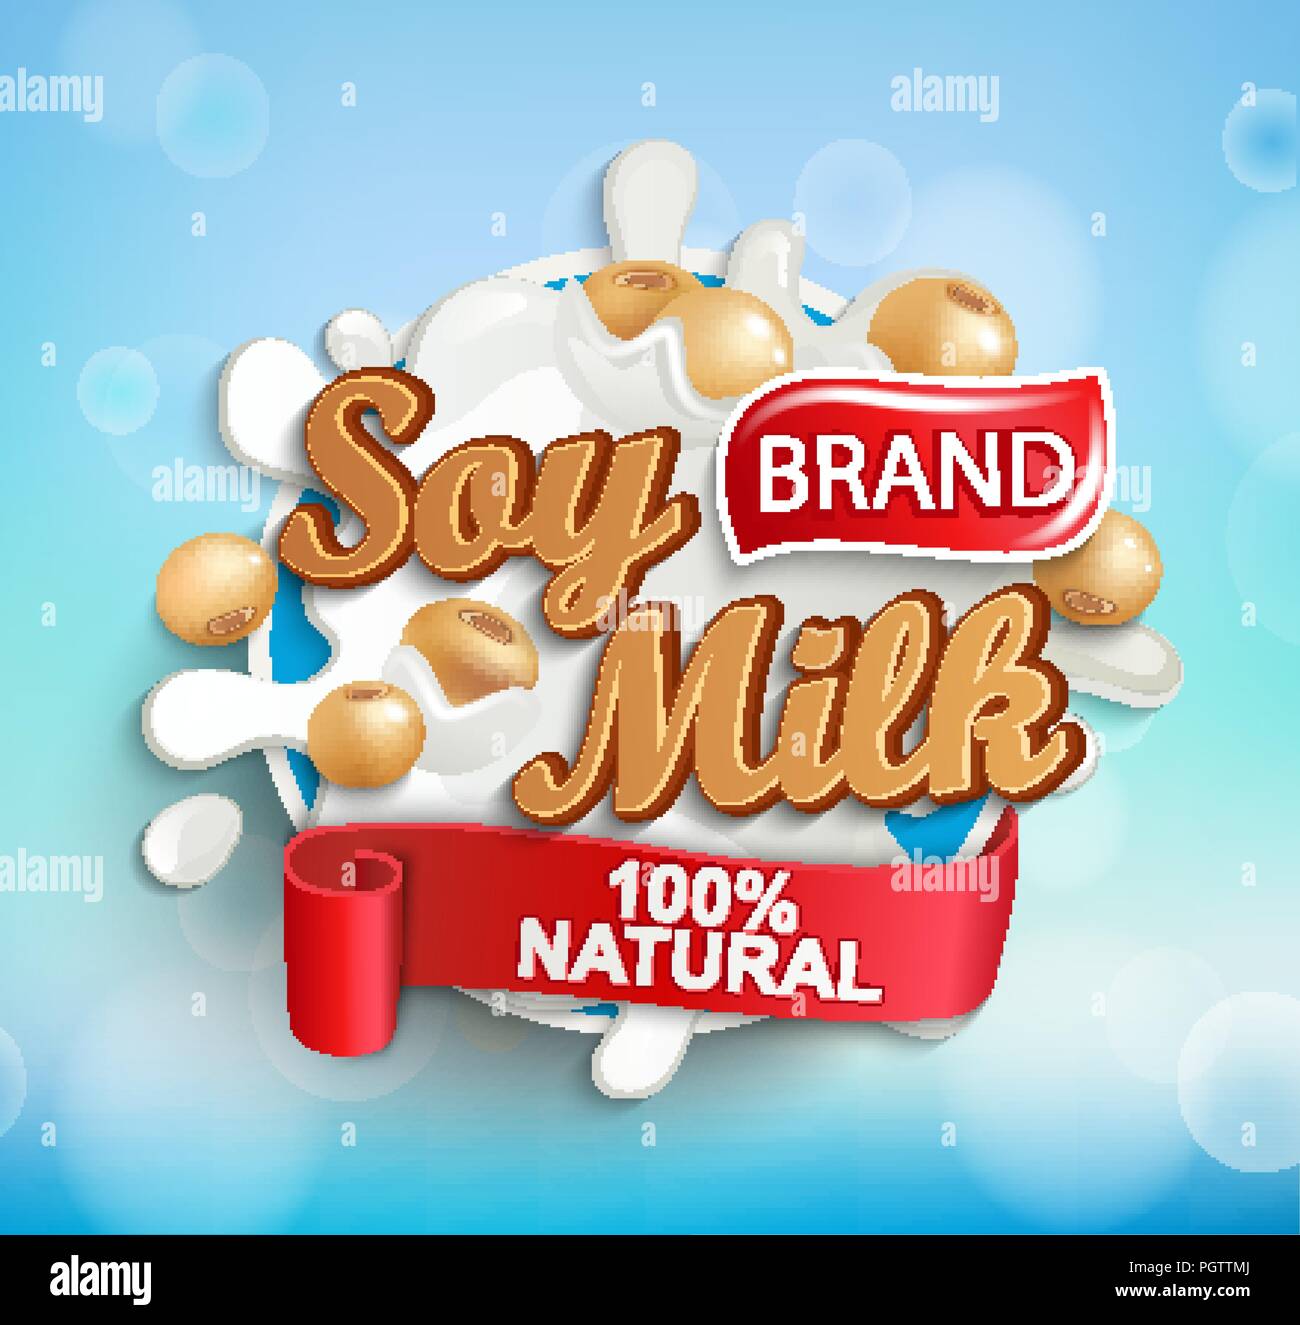 Natural and fresh soy milk label splash on blue bokeh background for your brand, logo, template, label, emblem for groceries, stores, packaging and advertising, marketing. Vector illustration. Stock Vector